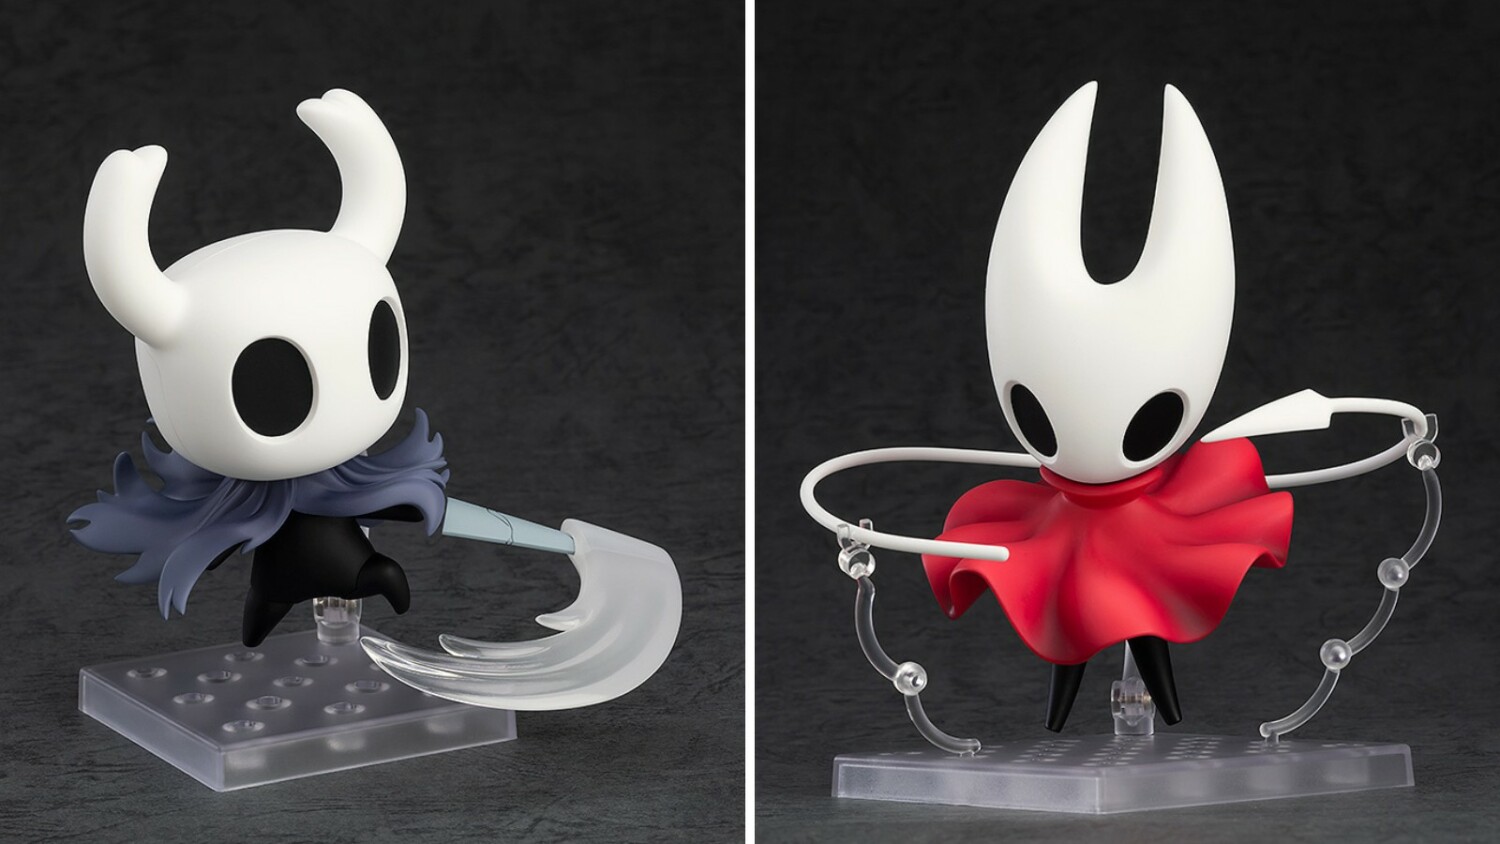 Hollow Knight Nendoroid Figures Up For Pre-Order – NintendoSoup